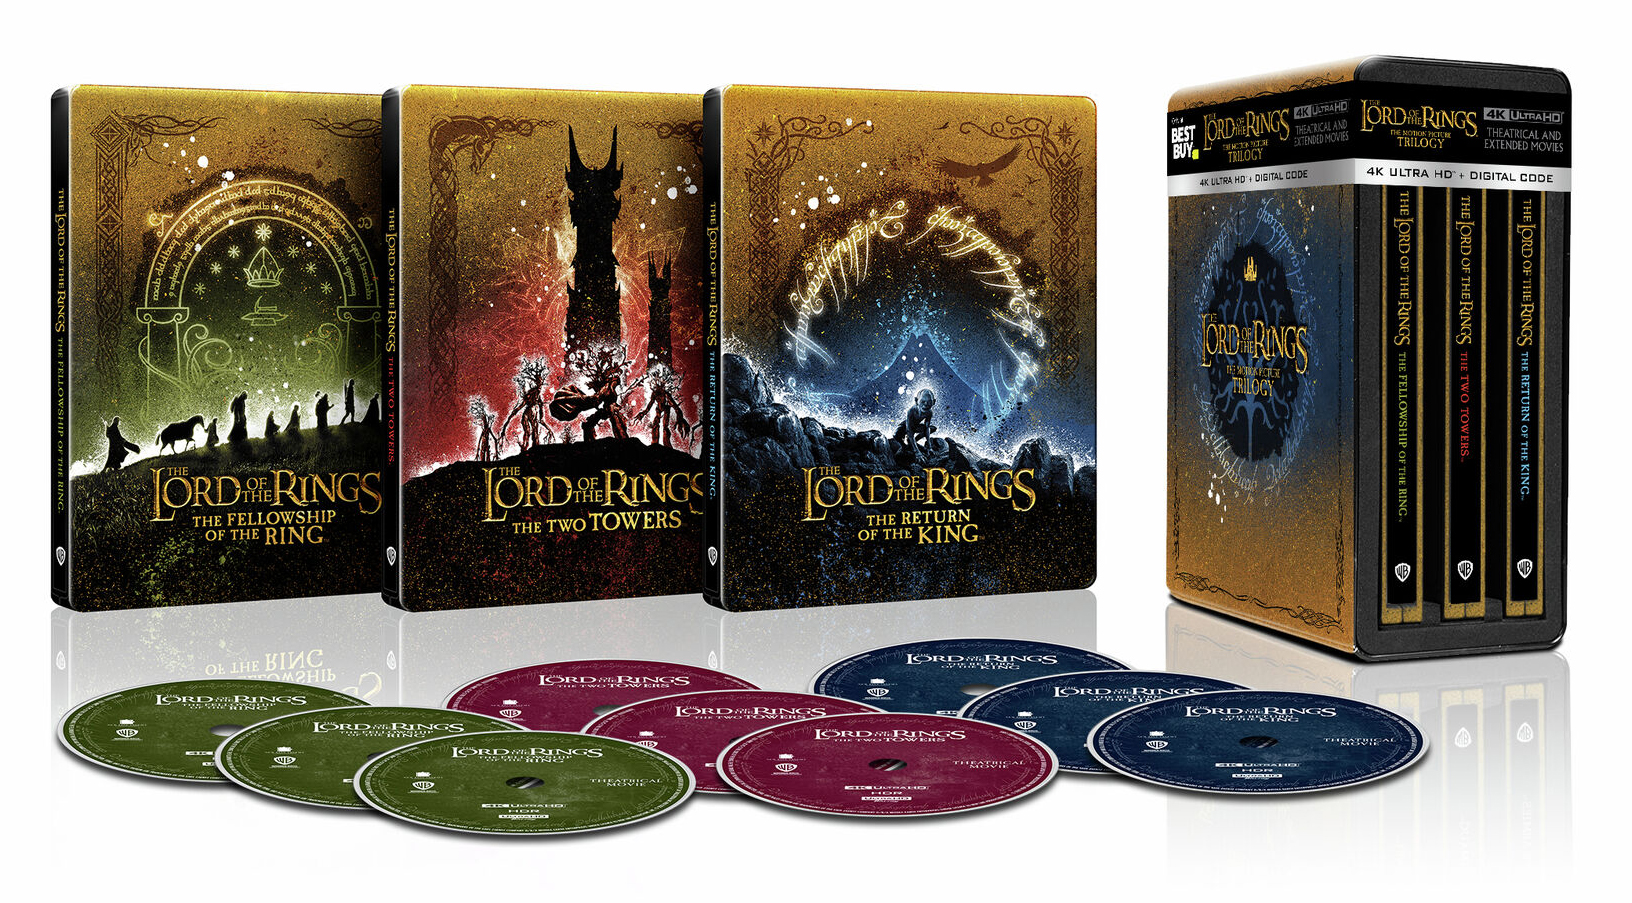 The Lord of the Rings: The Fellowship of the Ring Blu-ray (Extended Edition)